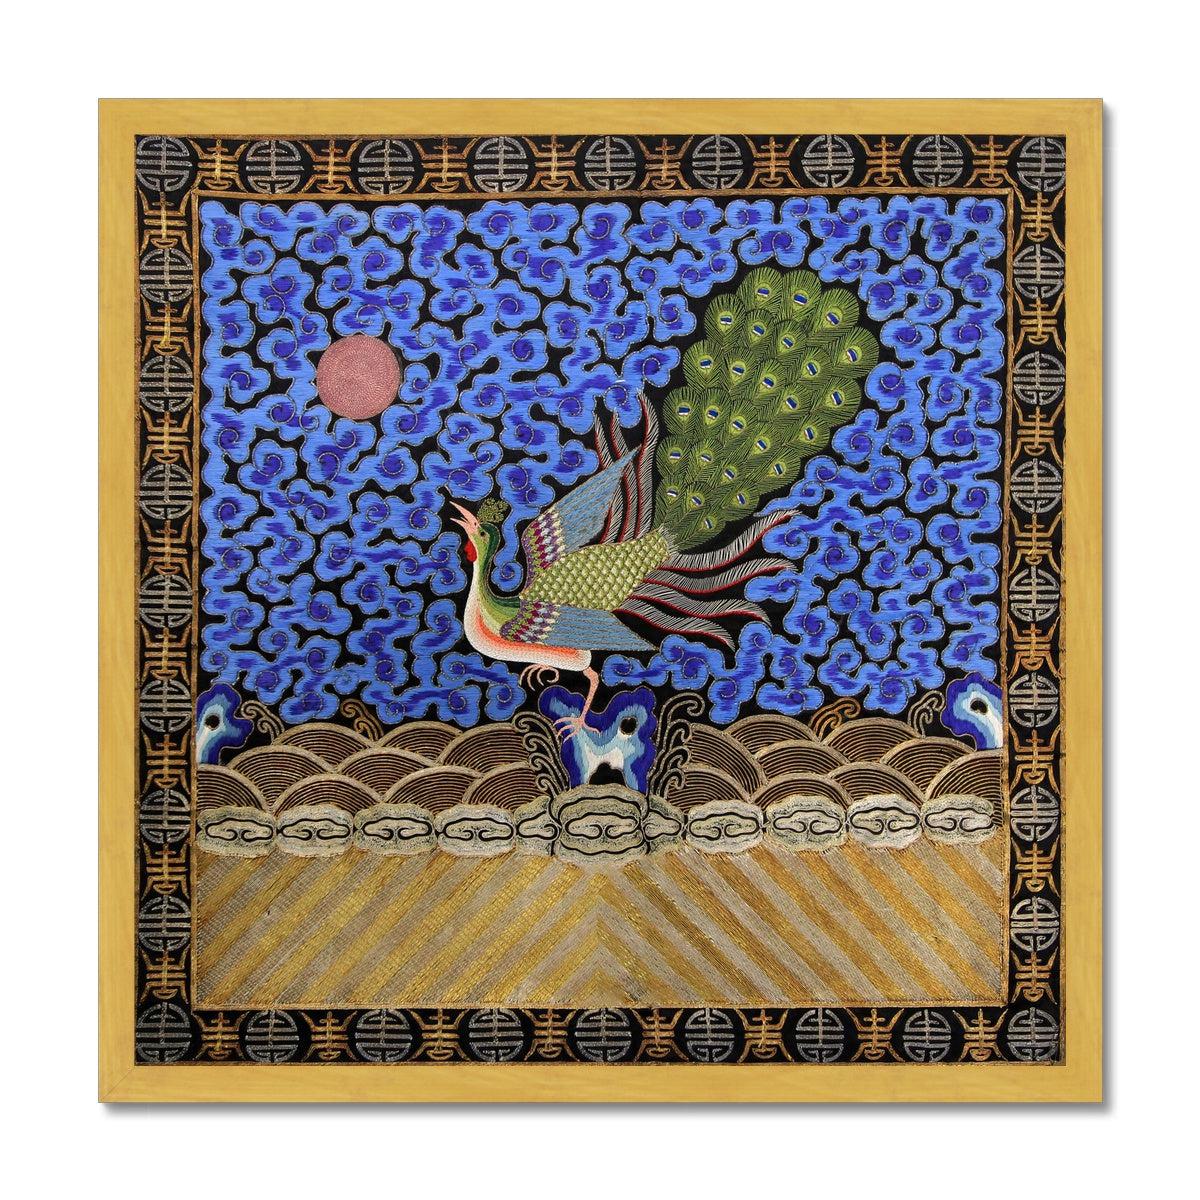 Fine art 12"x12" / Gold Frame Peacock Mandarin Square  | Traditional Chinese Qing Dynasty Silk Embroidery Design | Antique Framed Fine Art Print